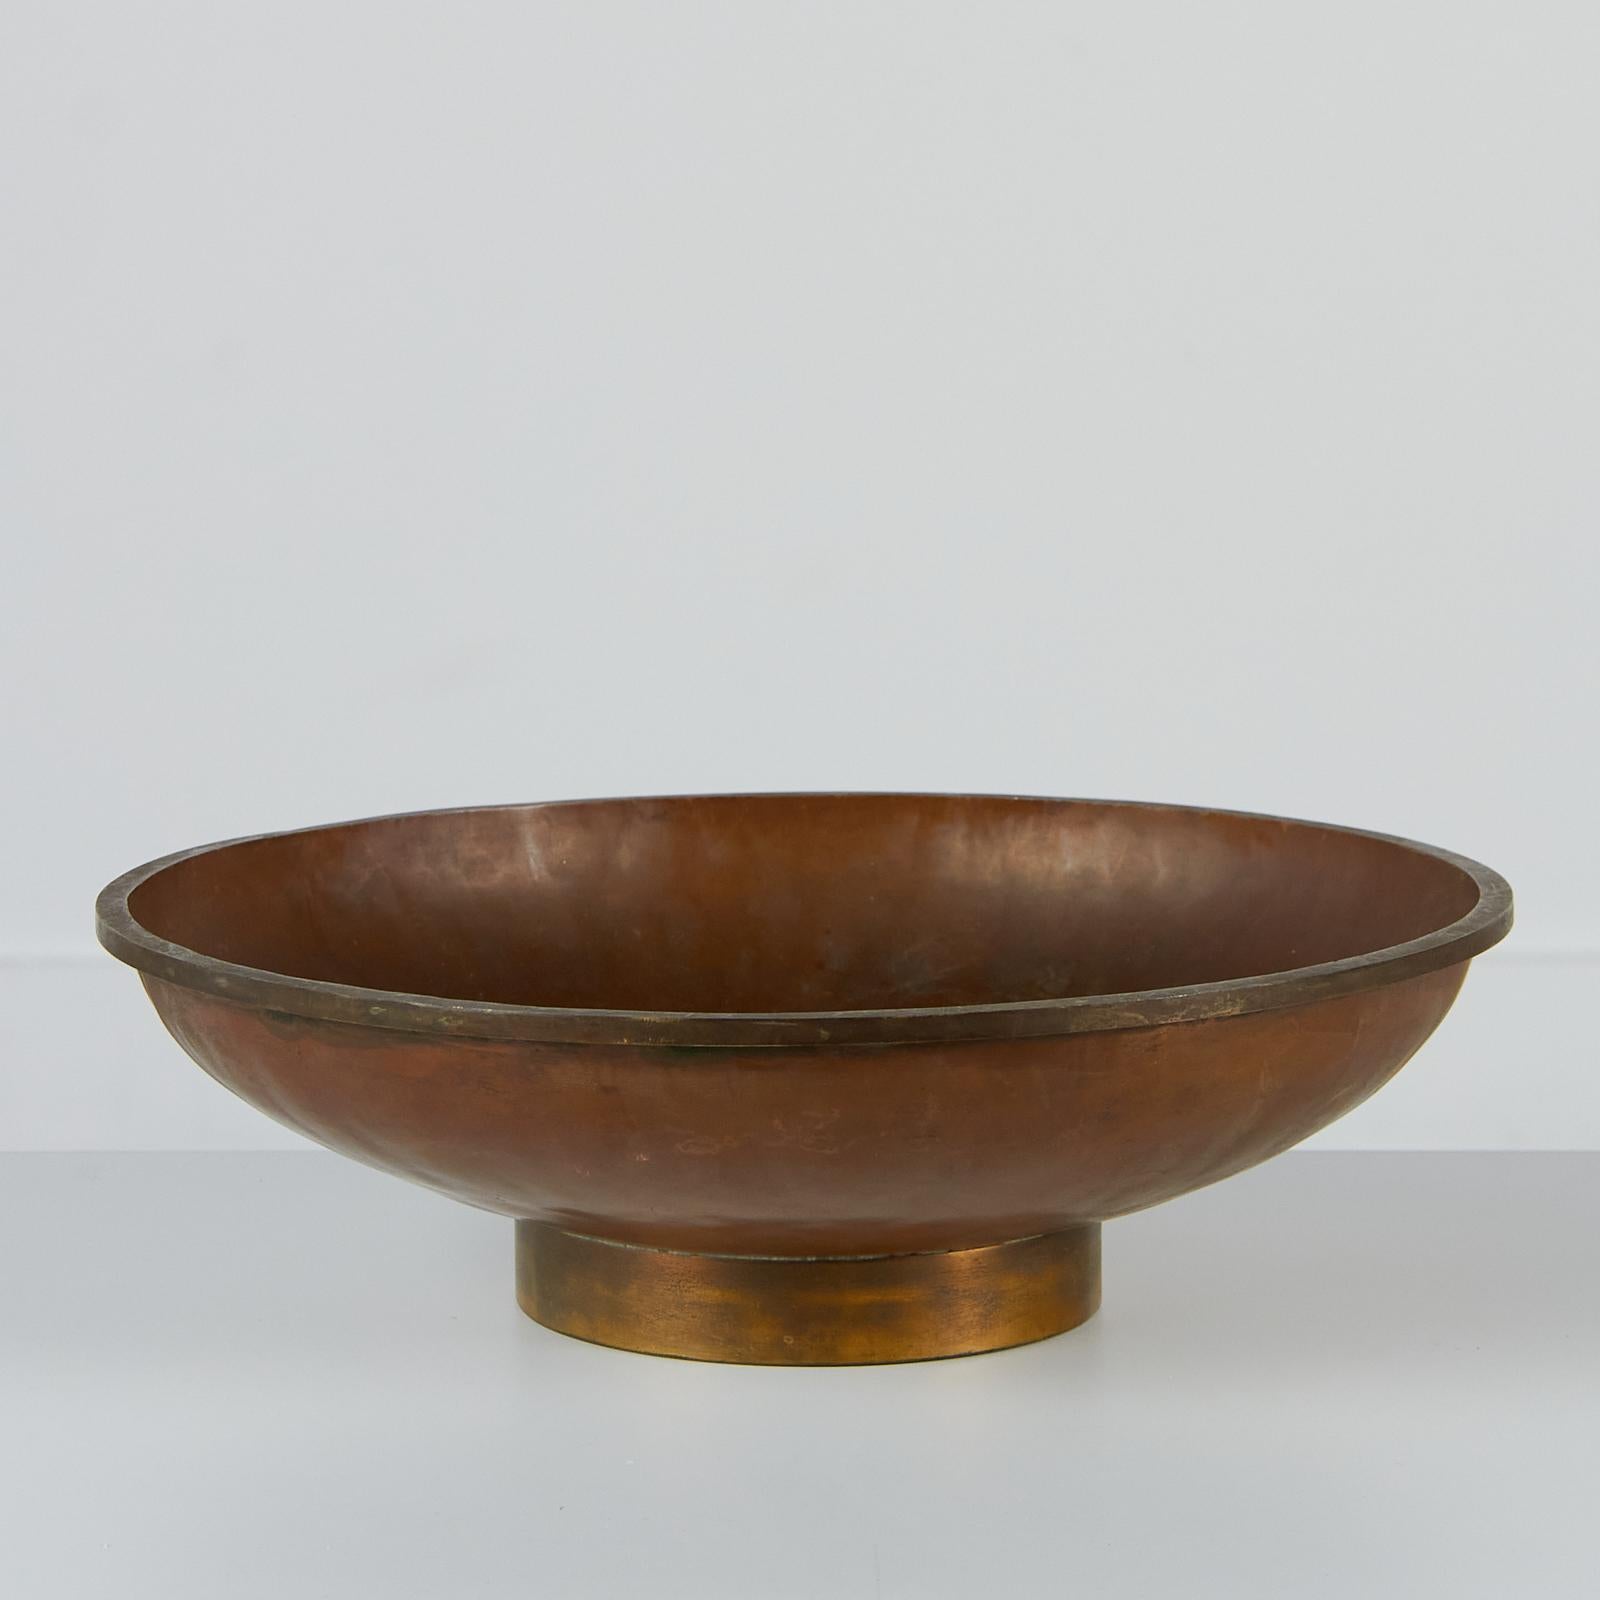 A large decorative copper bowl with a beautiful hammered detail throughout. This piece would be perfect on an entry way table to hold your trinkets or even in the kitchen to showcase your fruits and veggies. We personally see it on a large coffee